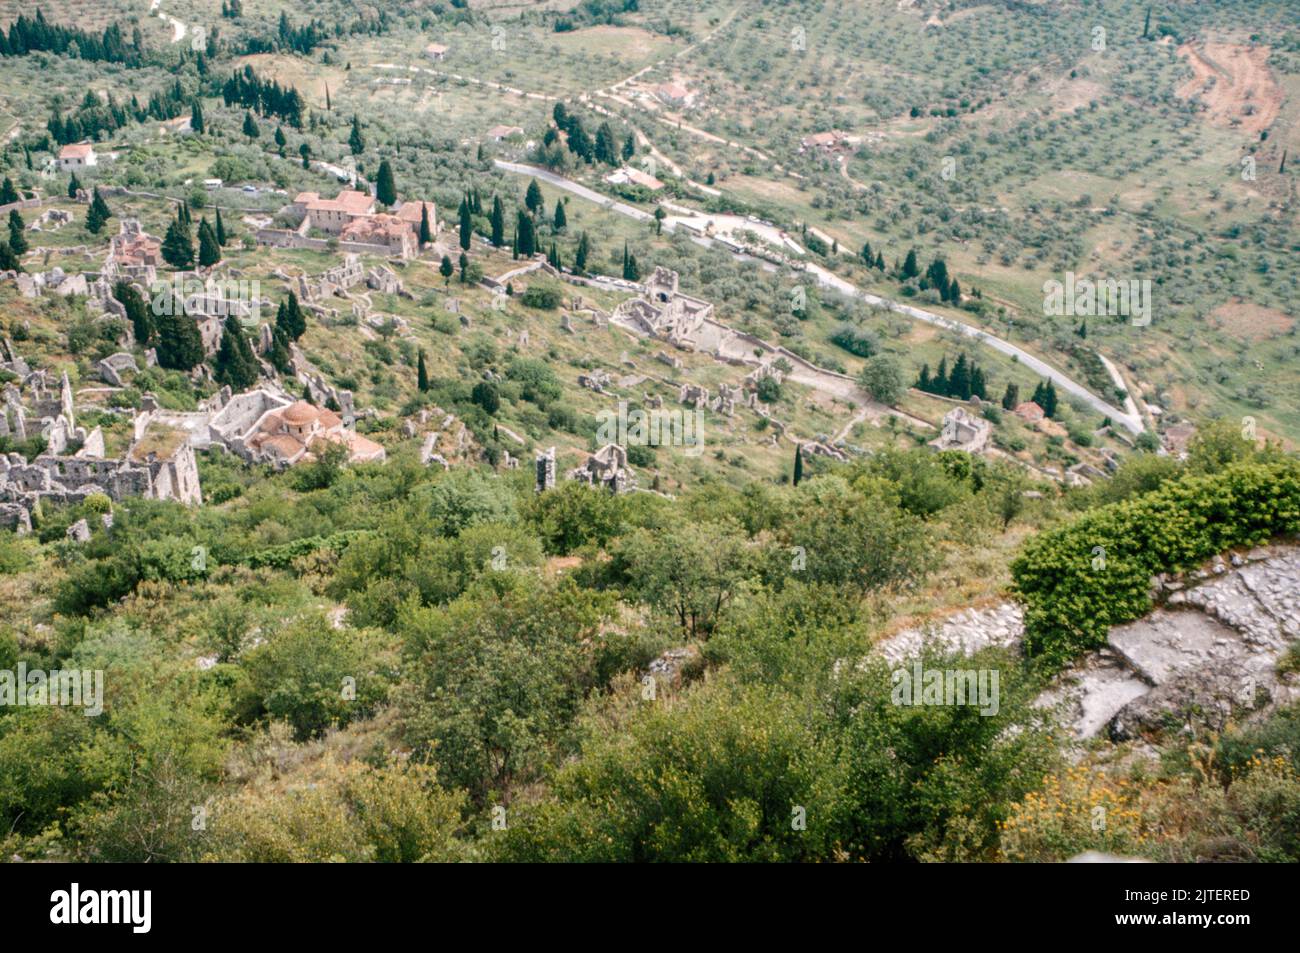 View form the Mystros hill on Mystras (Mistras or Myzithras), a fortified town and a former municipality in Laconia, Peloponnese, Greece near ancient Sparta, it served as the capital of the Byzantine Despotate of the Morea. March 1980. Archival scan from a slide. Stock Photo